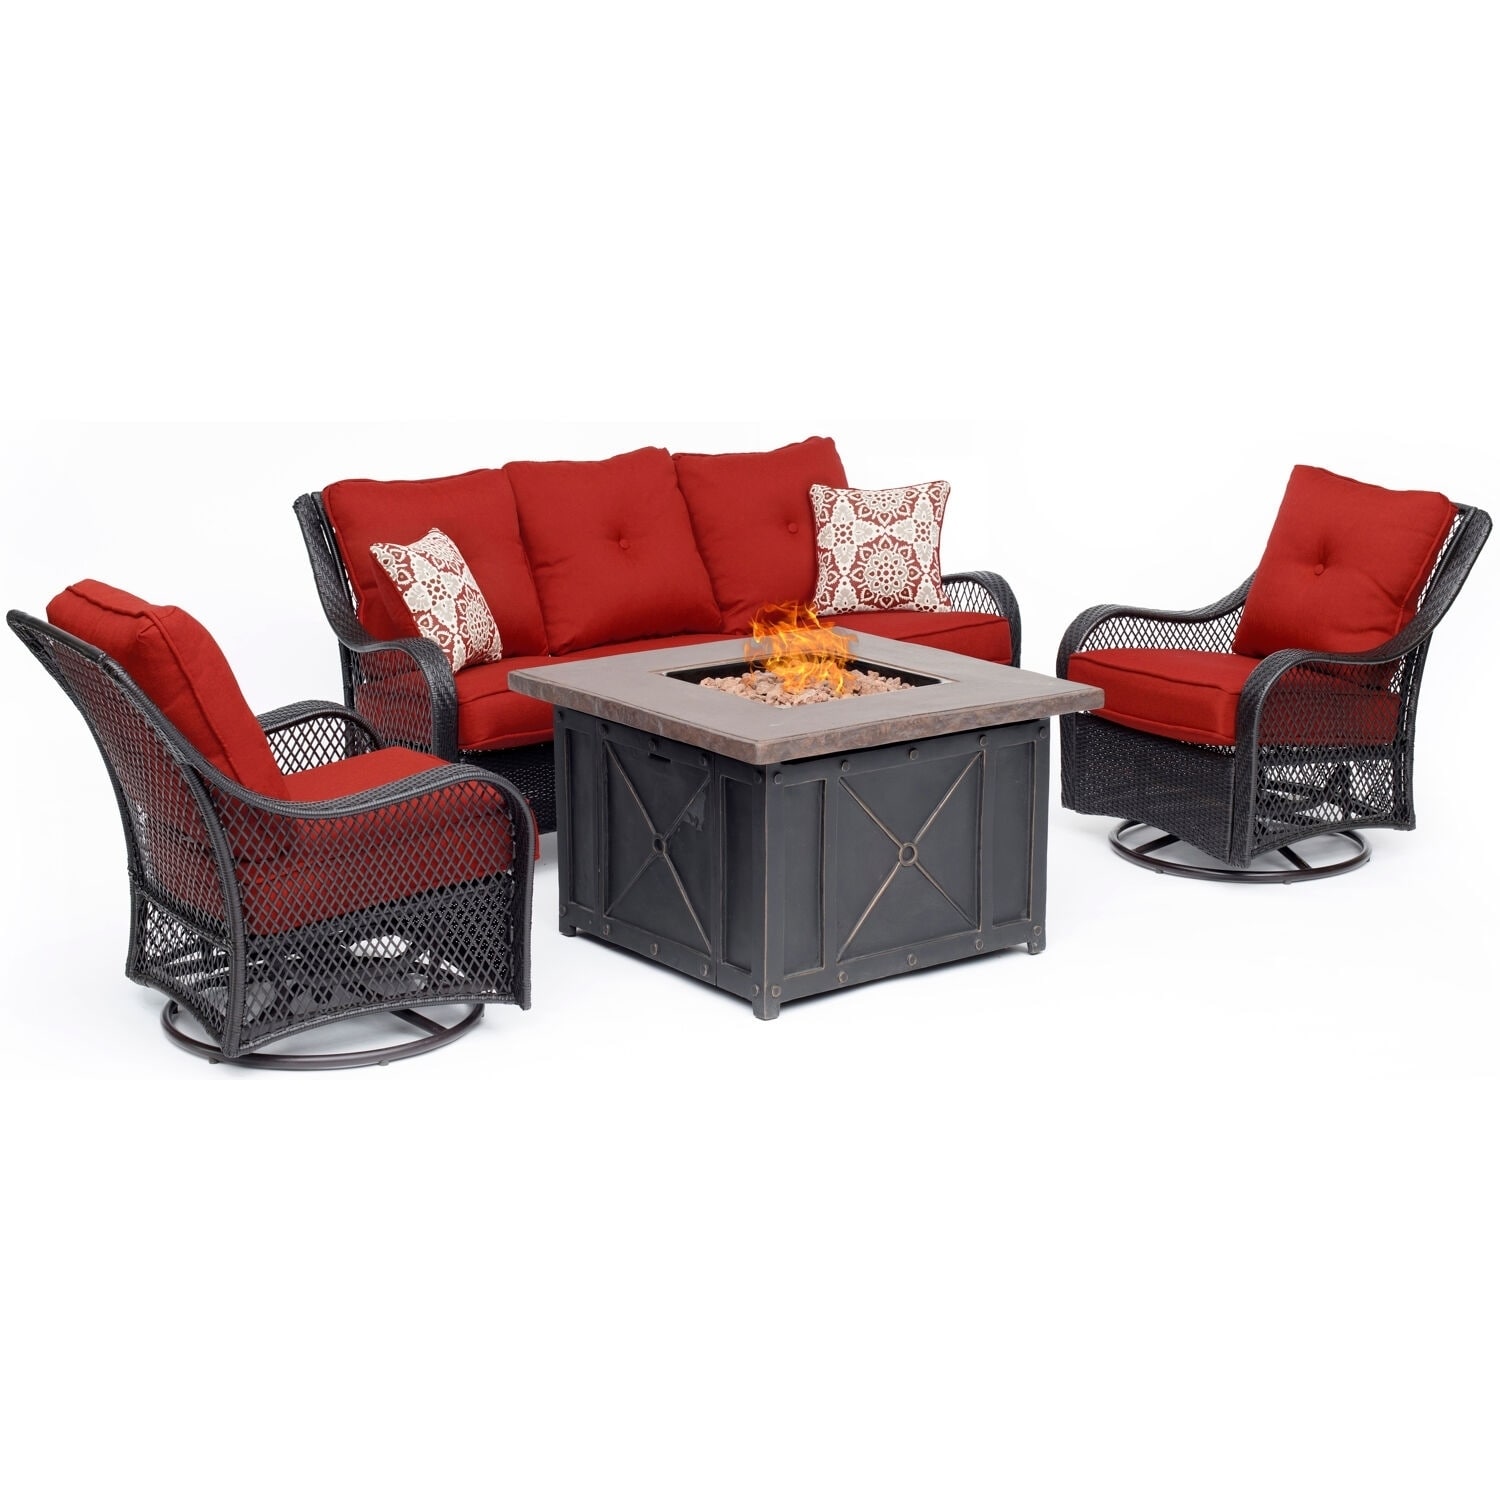 Hanover Orleans 4-piece Woven Fire Pit Lounge Set In Autumn Berry With Sofa  2 Swivel Gliders And Durastone Fire Pit